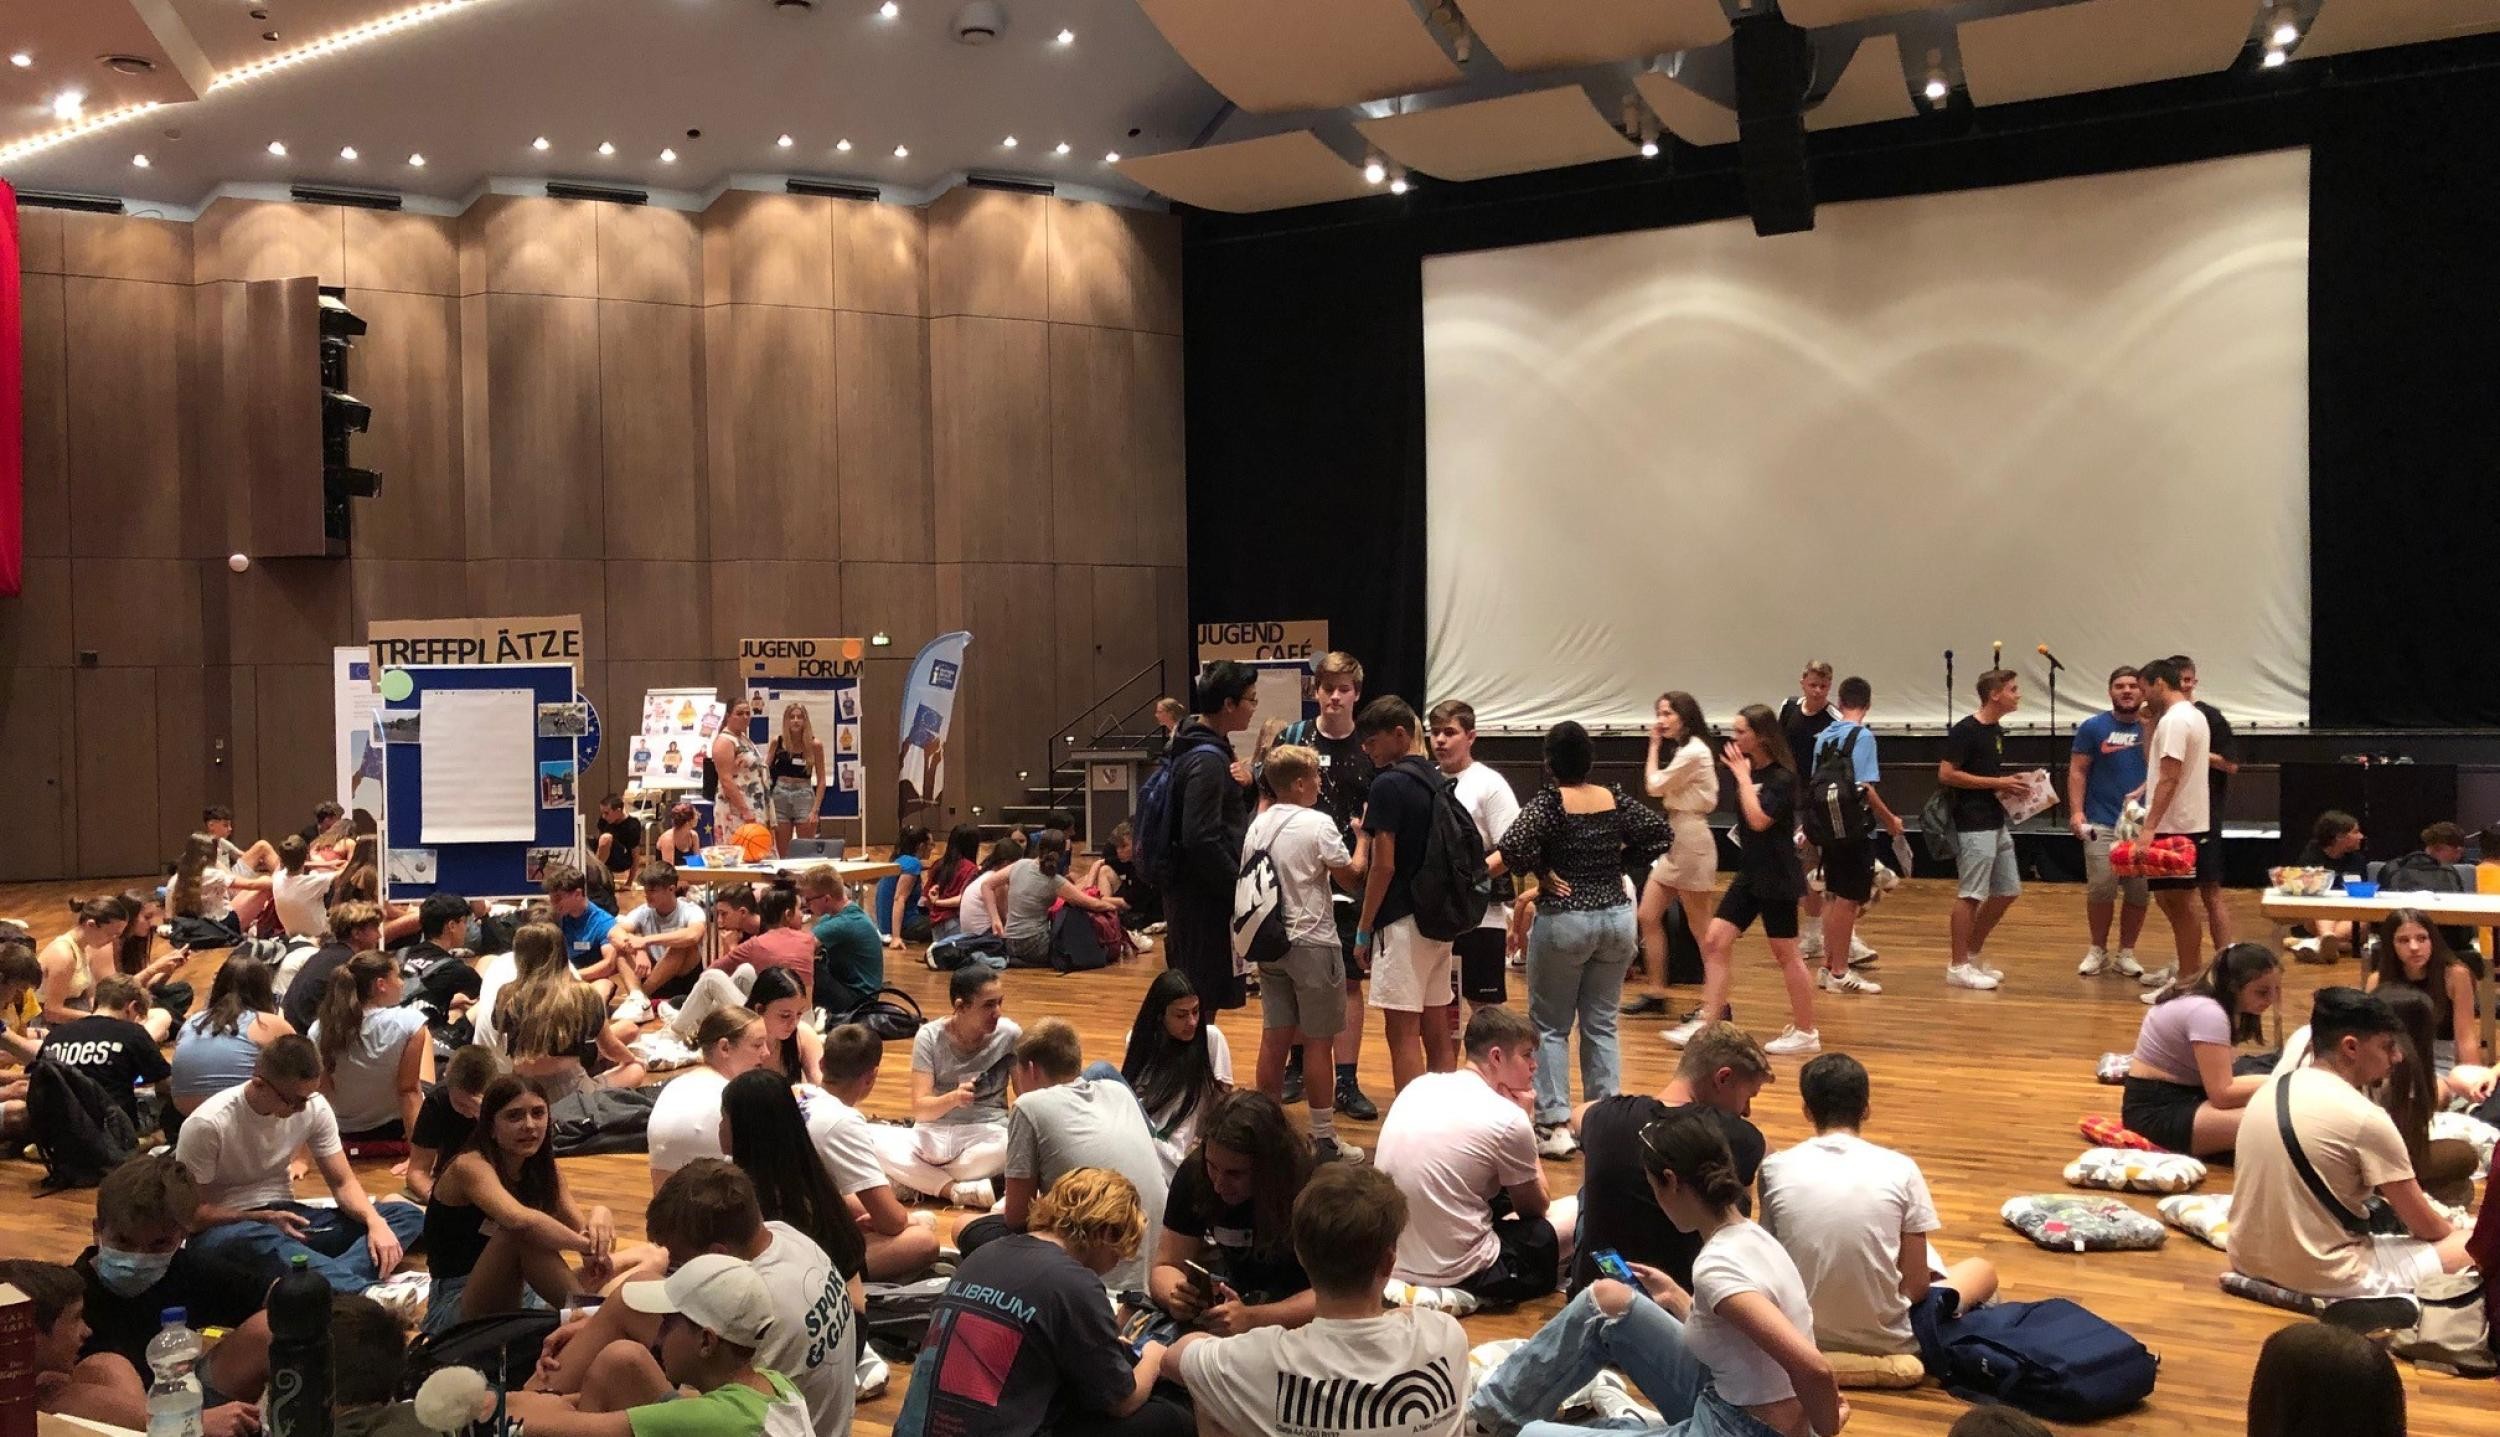 Many young people sit and stand in a large hall. There are information stands and a large screen in the background.